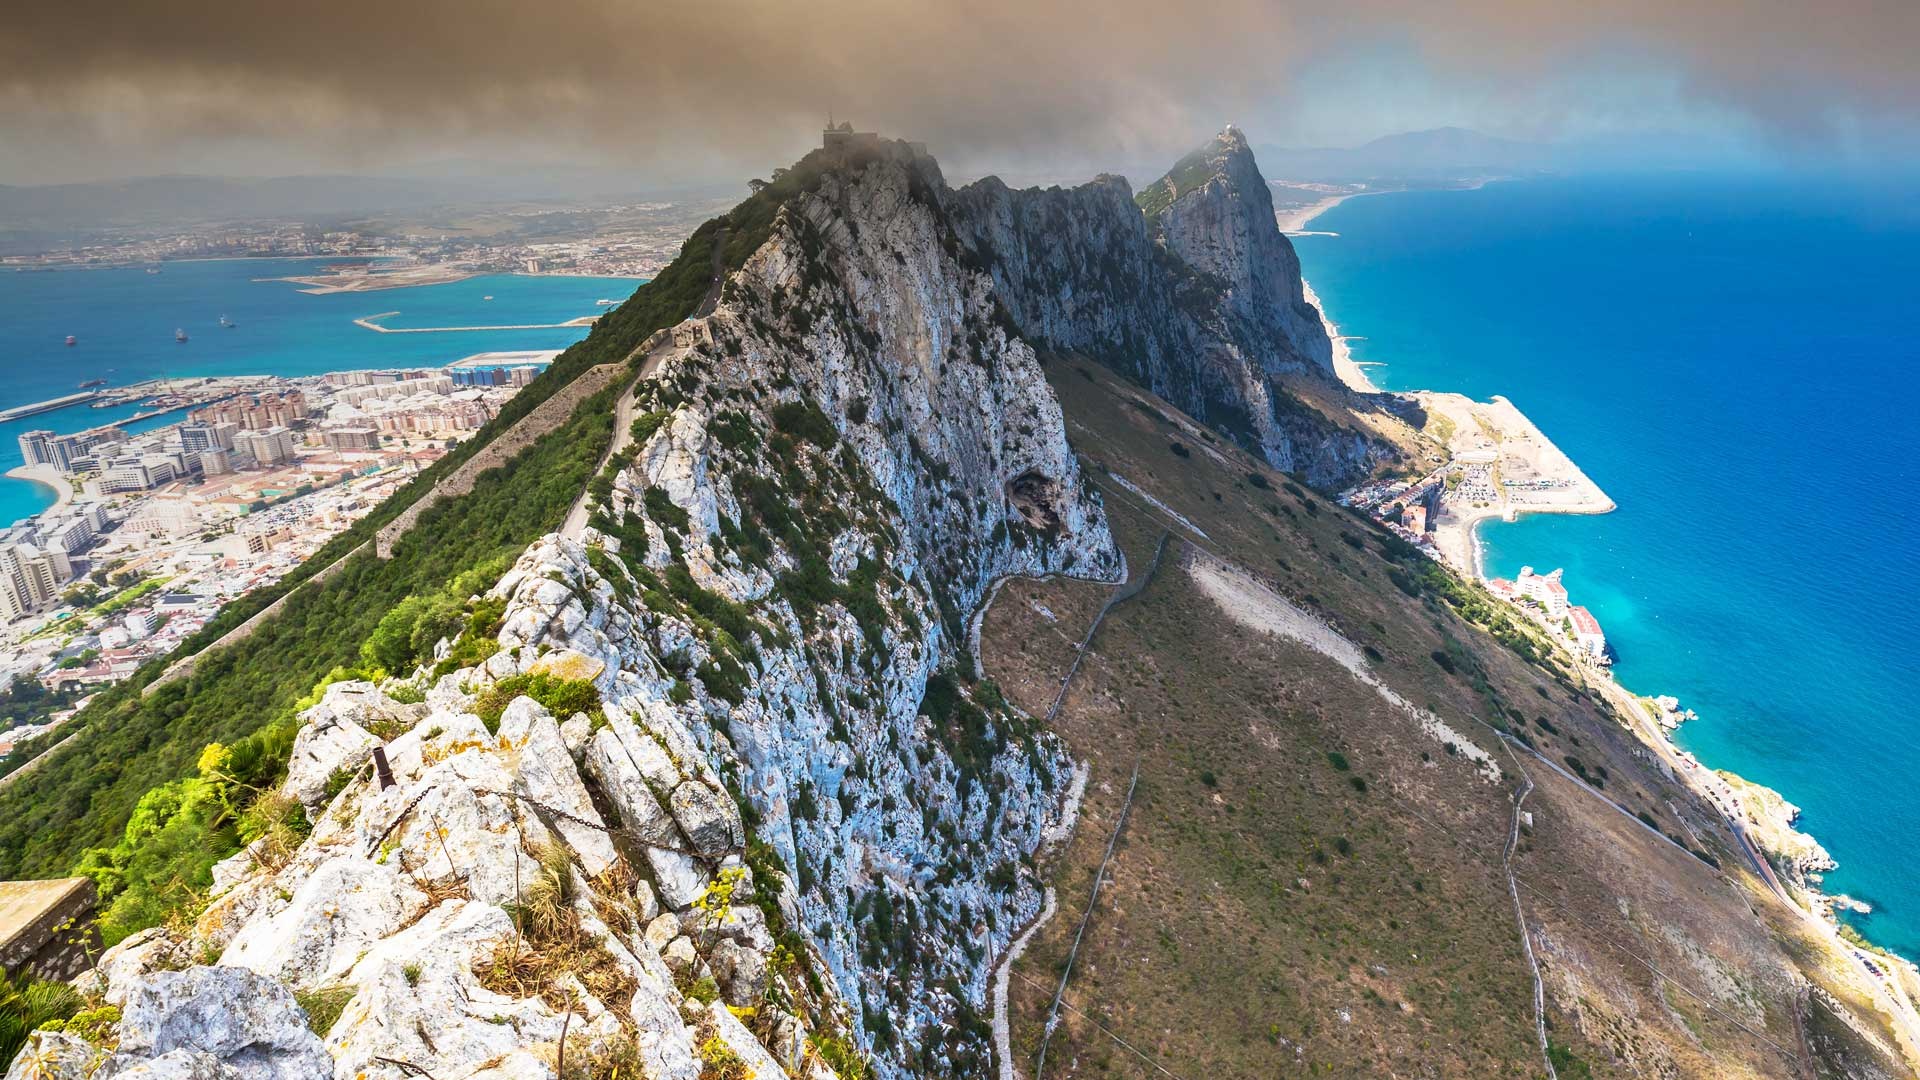 View of the rock of Gibraltar, Breathtaking panorama, Bing gallery, Captivating landscape, 1920x1080 Full HD Desktop